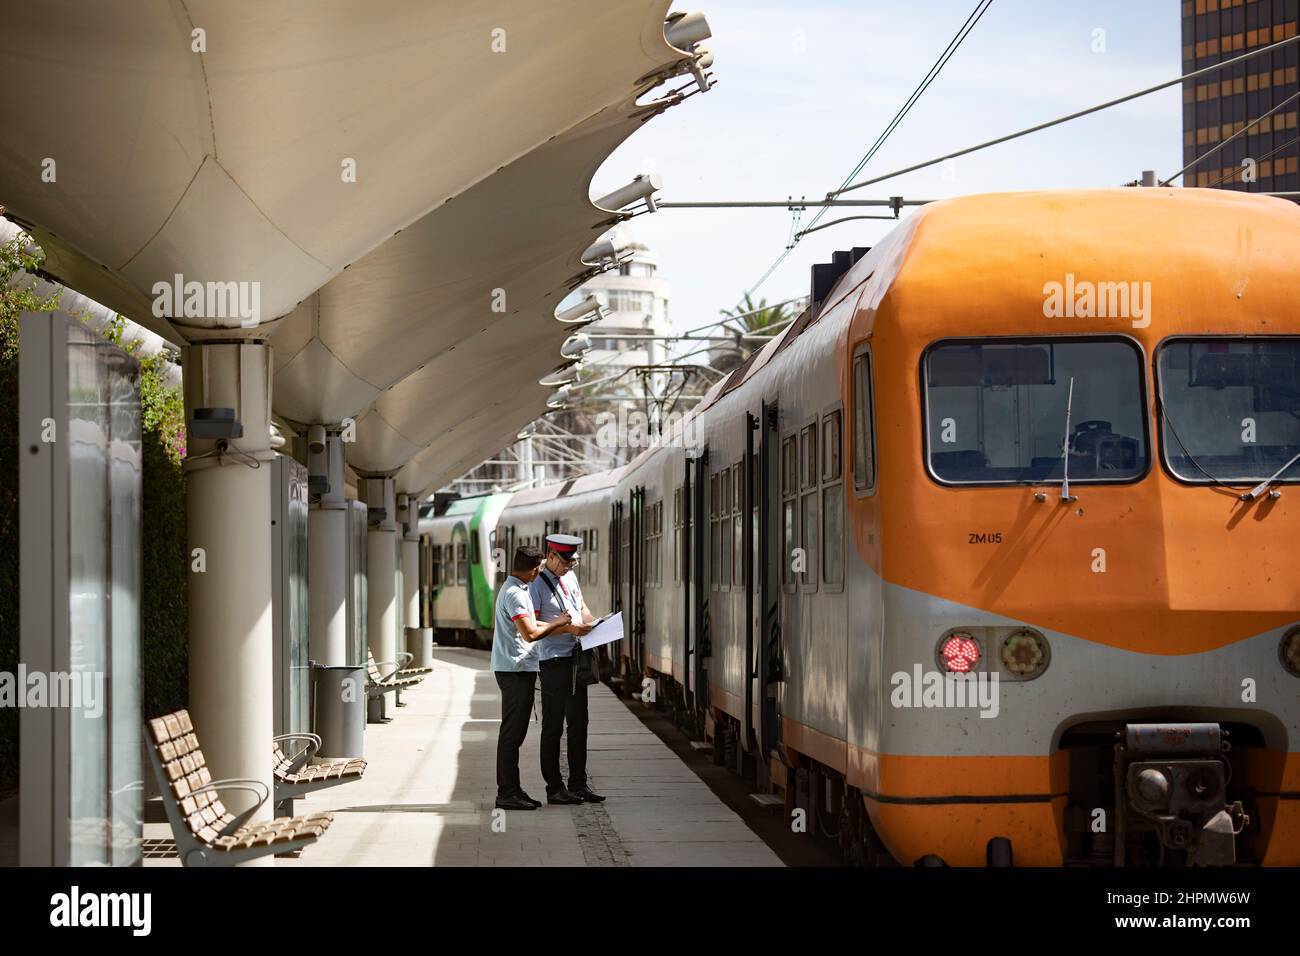 Conductors wait outside a passenger train on the boarding platform at Casa Port train station in Casablanca, Morocco. Stock Photo